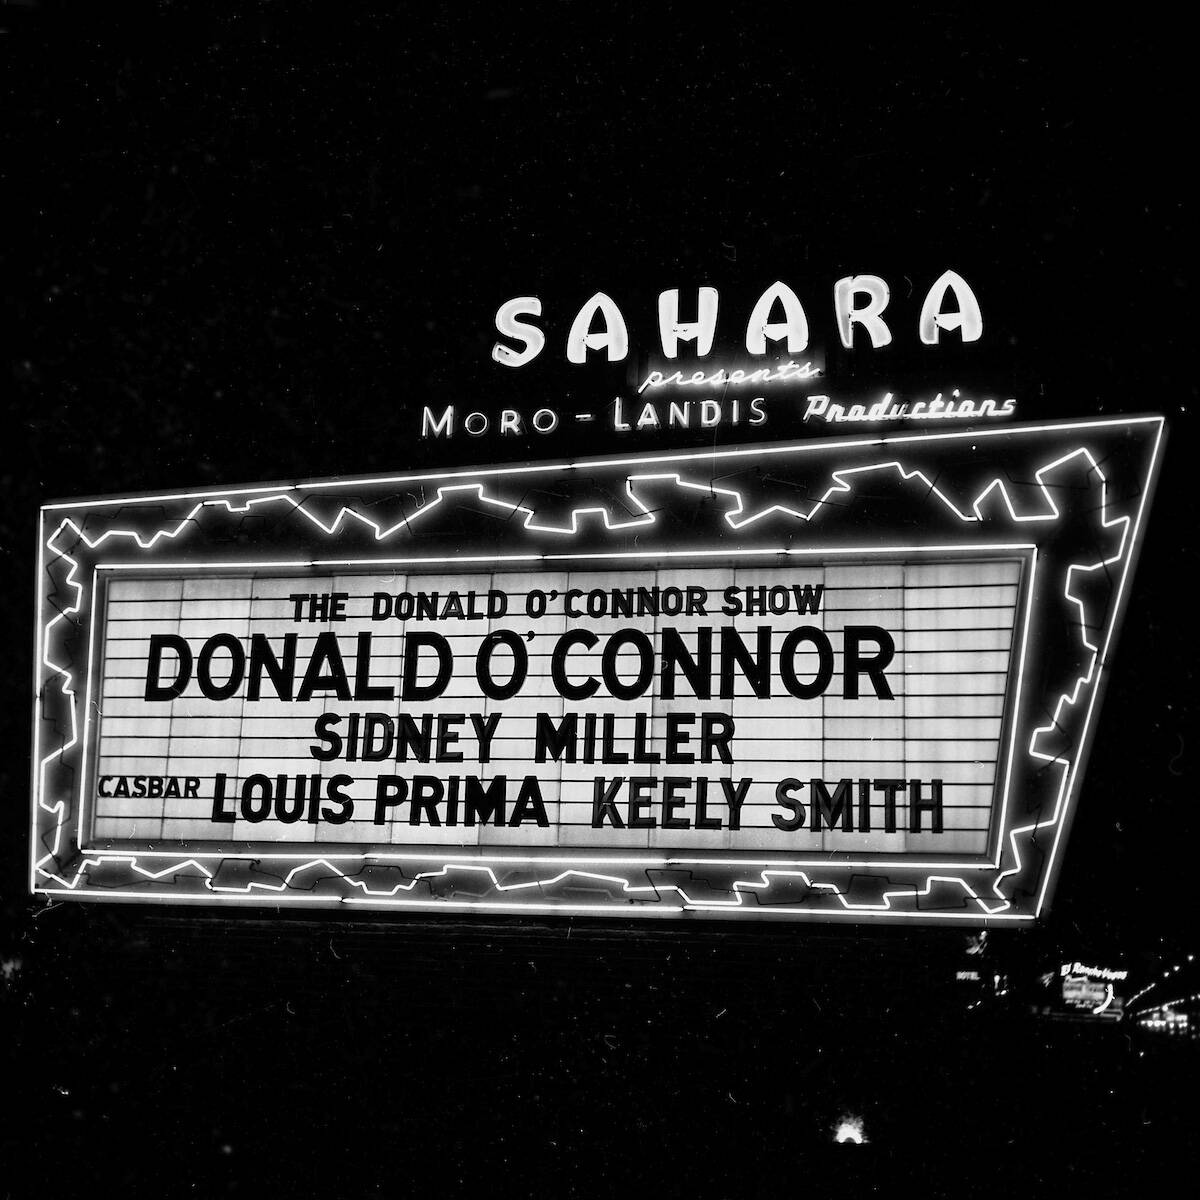 Donald O'Connor and Louis Prima are featured at the Sahara on Dec. 31, 1955. (Las Vegas News Bu ...